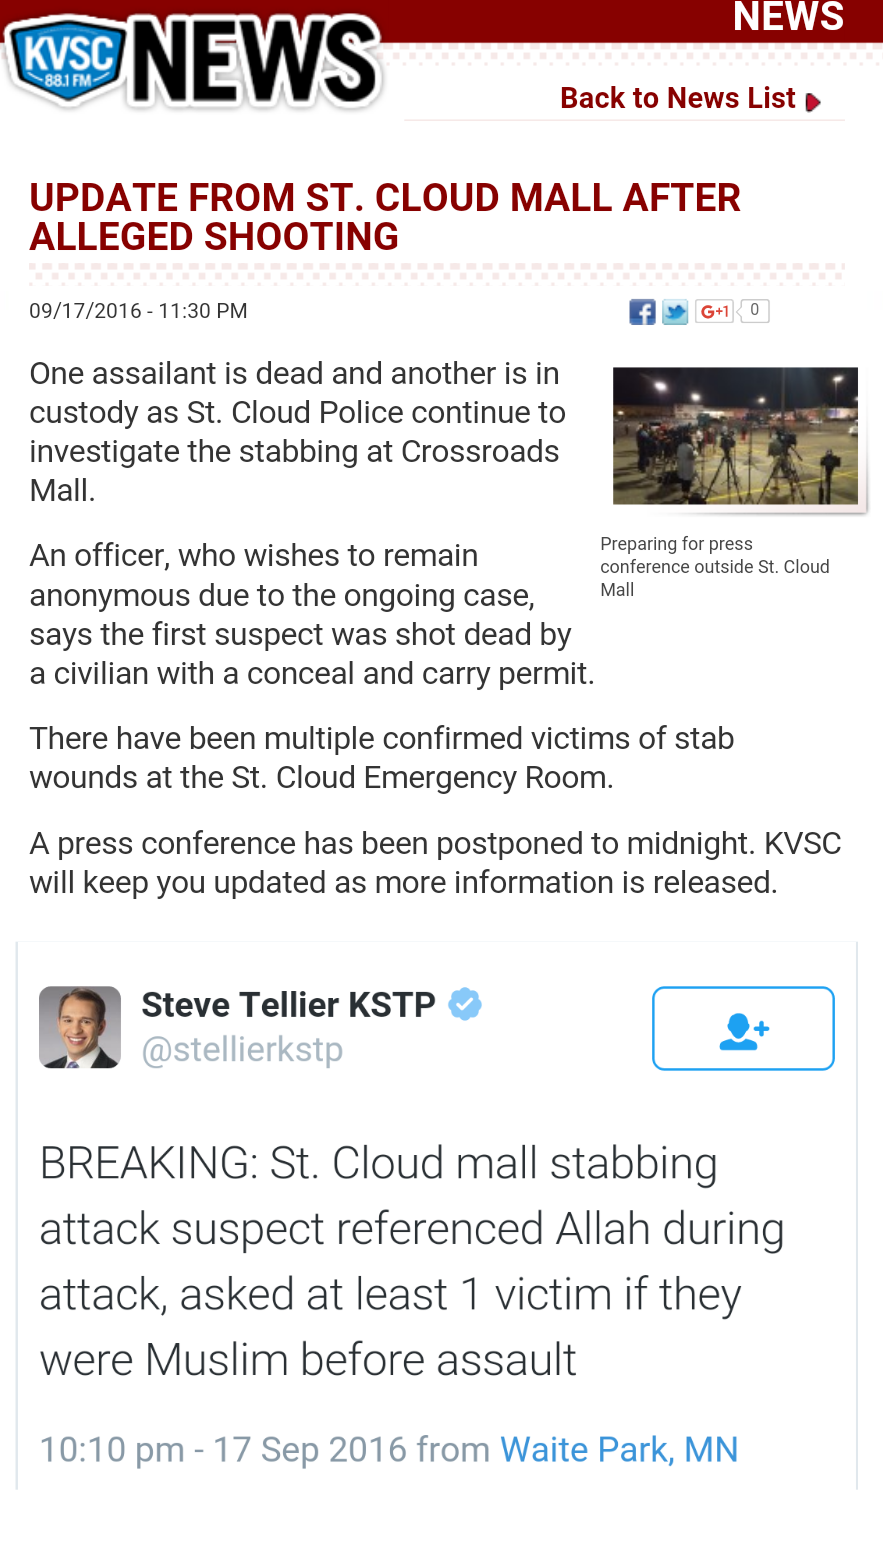 A man with a CCW permit shot the Muslim mall stabber in Minnesota today